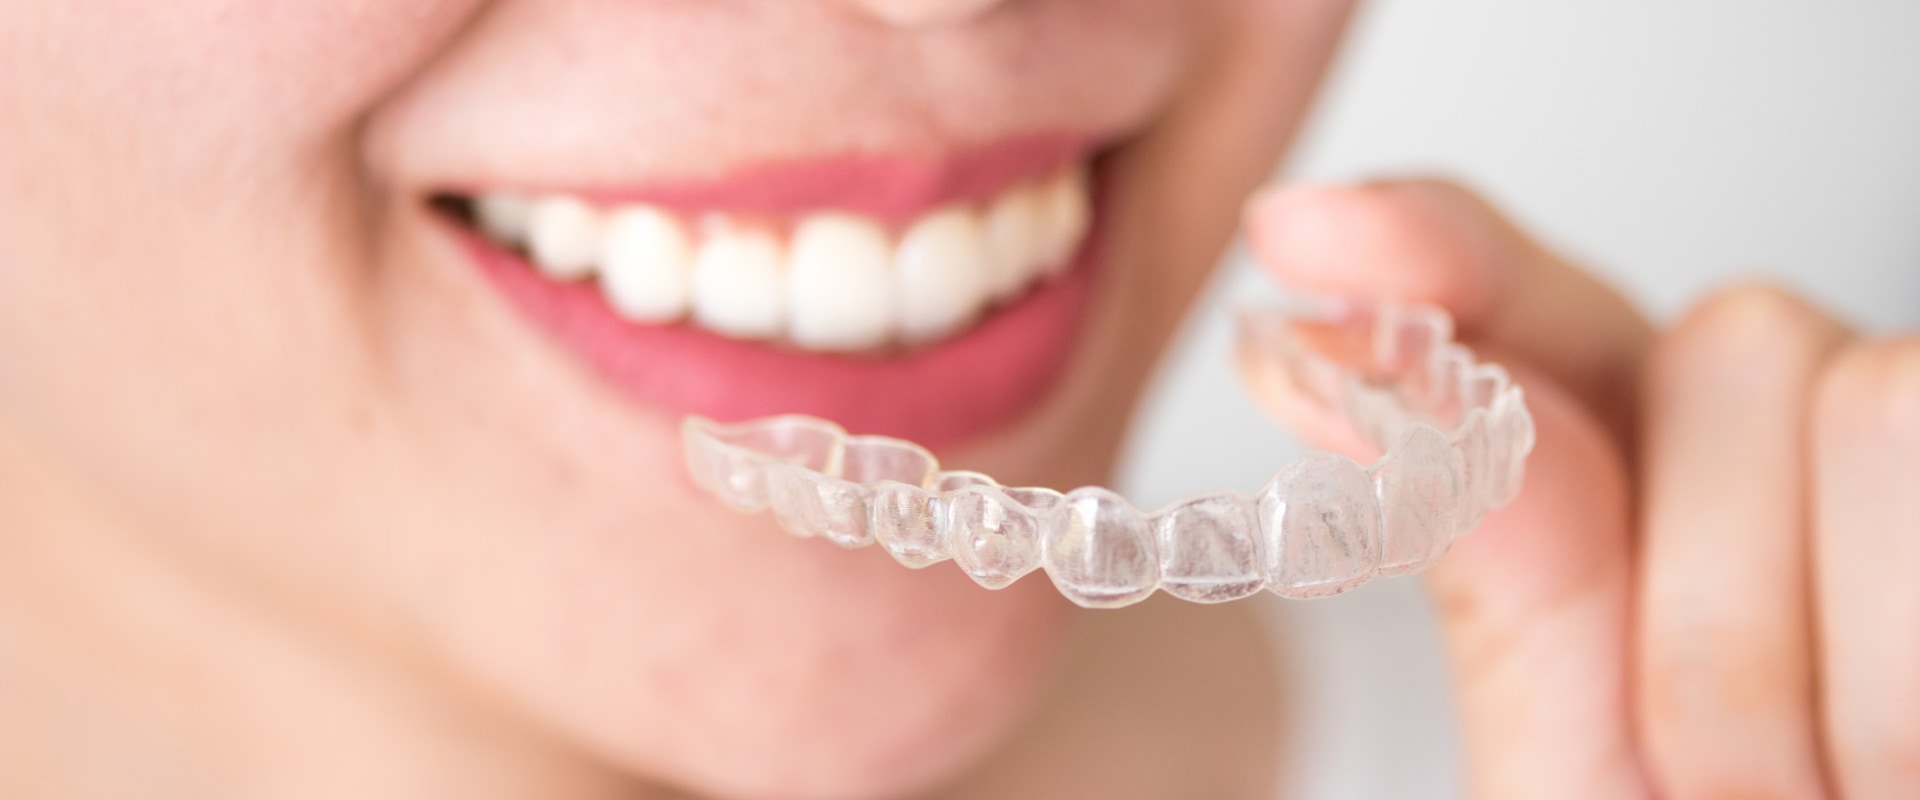 How much do invisalign payments cost per month?